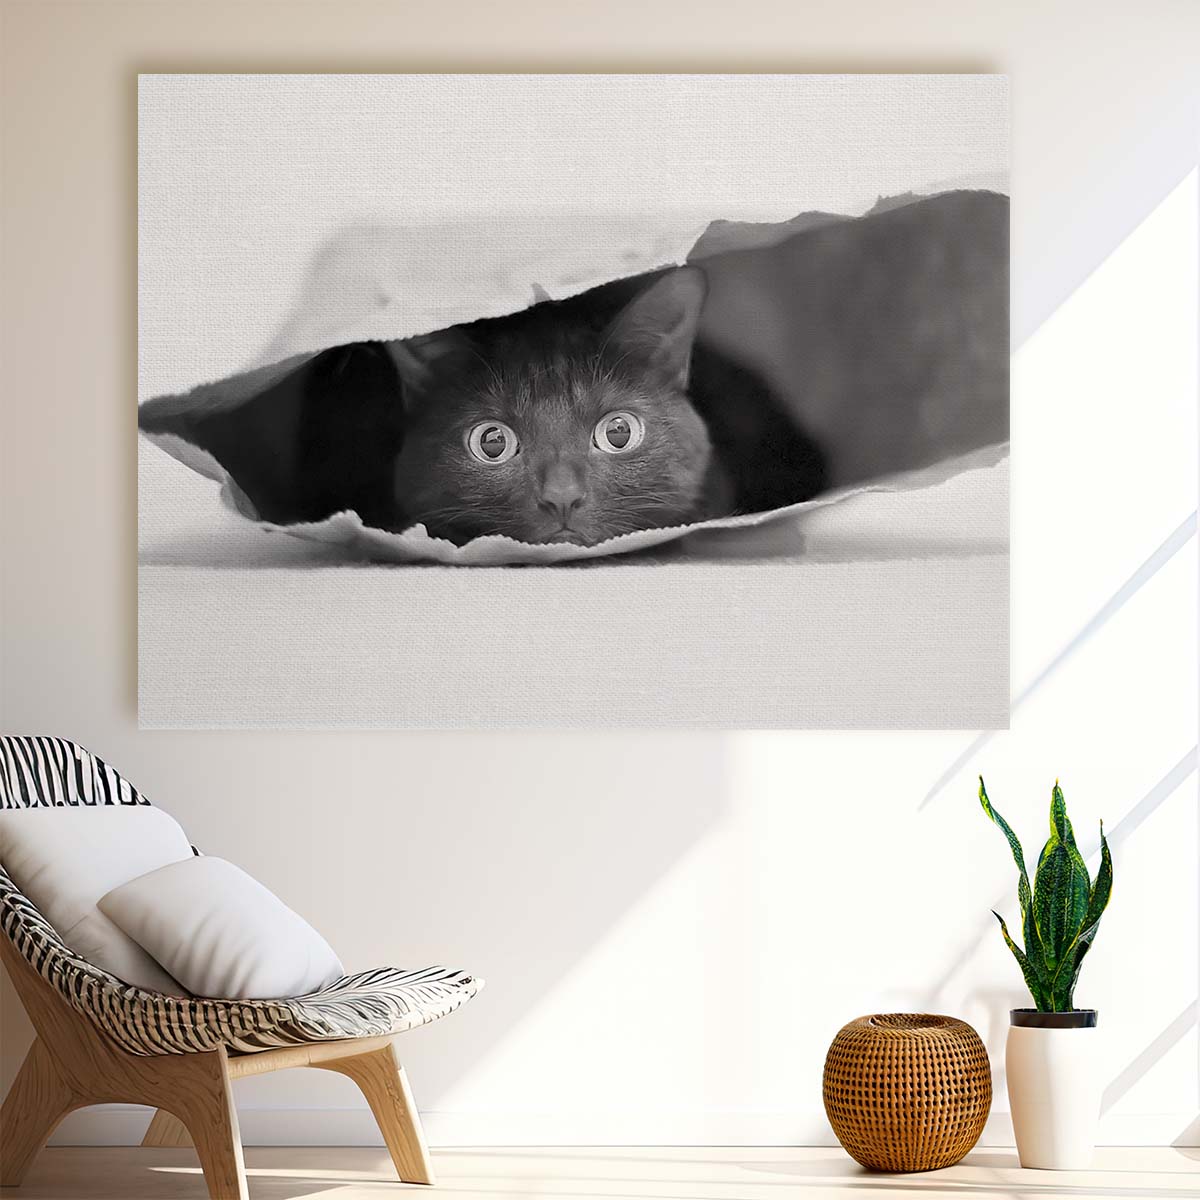 Curious Cat in Shopping Bag Humor Monochrome Wall Art by Luxuriance Designs. Made in USA.